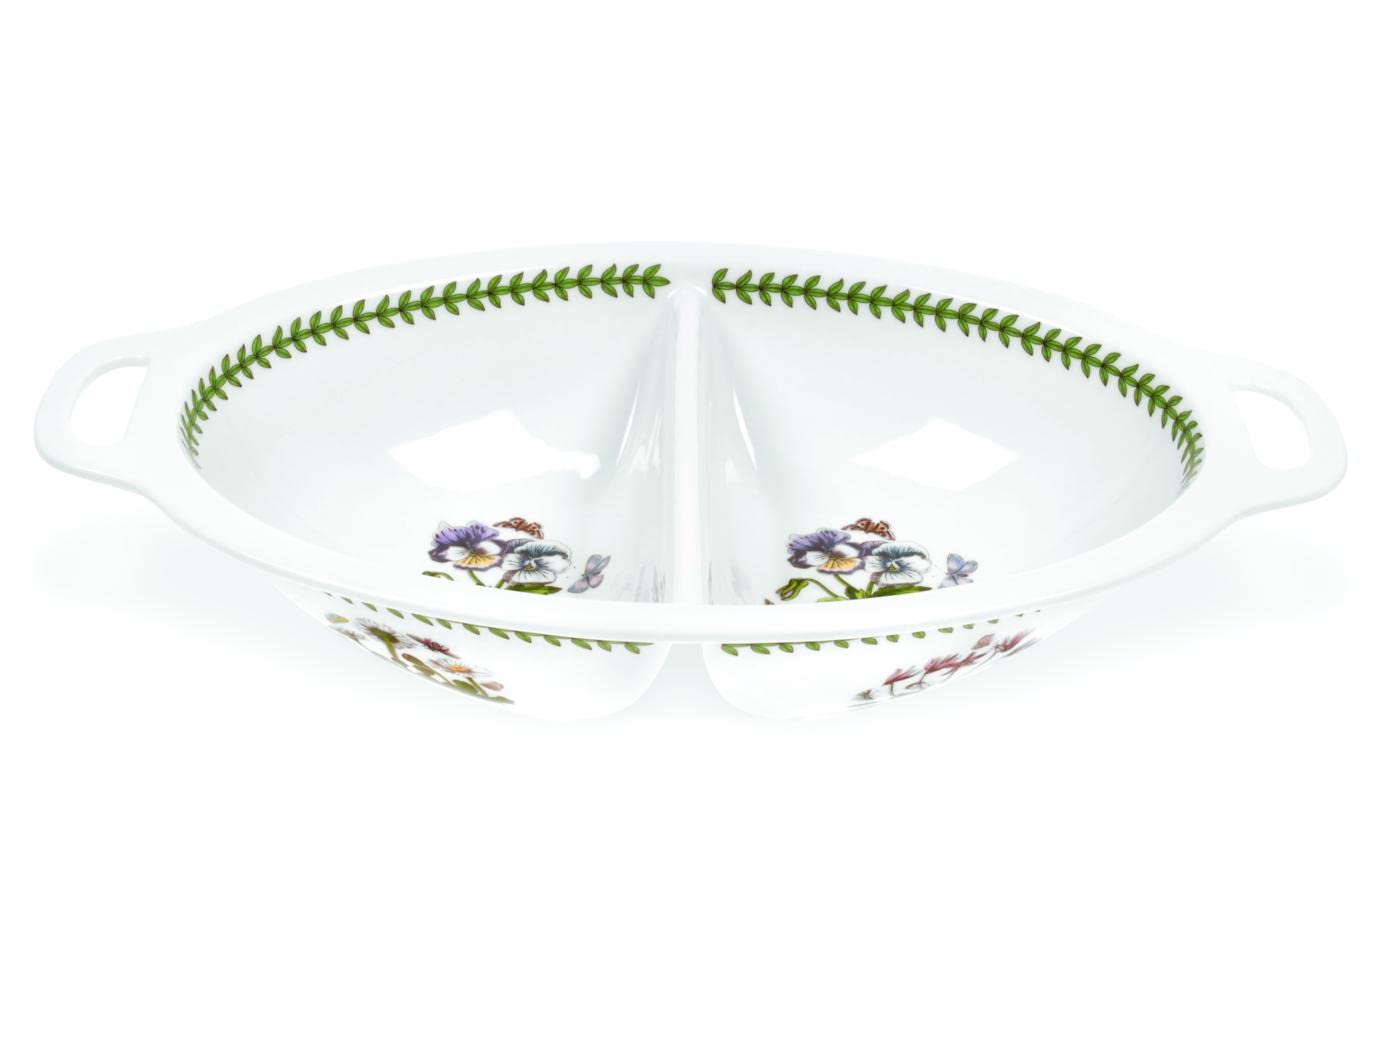 Portmeirion Botanic Garden Divided Vegetable Dish | 15.5 Inch Handled Serving Platter with Pansy Motif | Made from Porcelain | Microwave and Dishwasher Safe